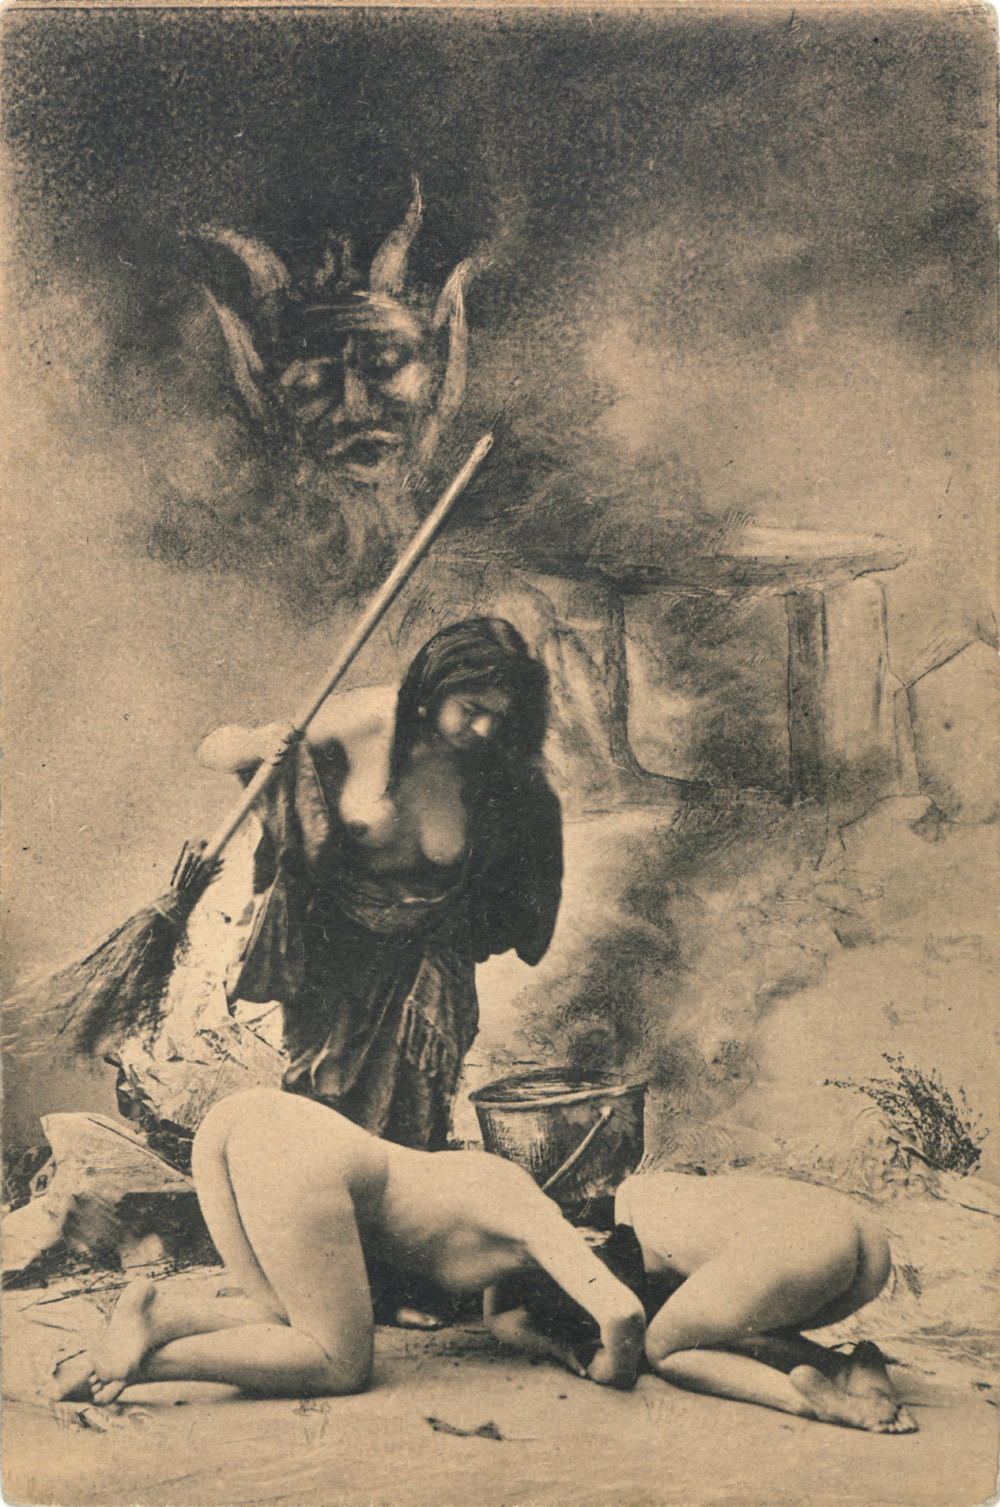 And to cap off, the annual reblogging of the Victorian Naked Witches shenanigans.Good